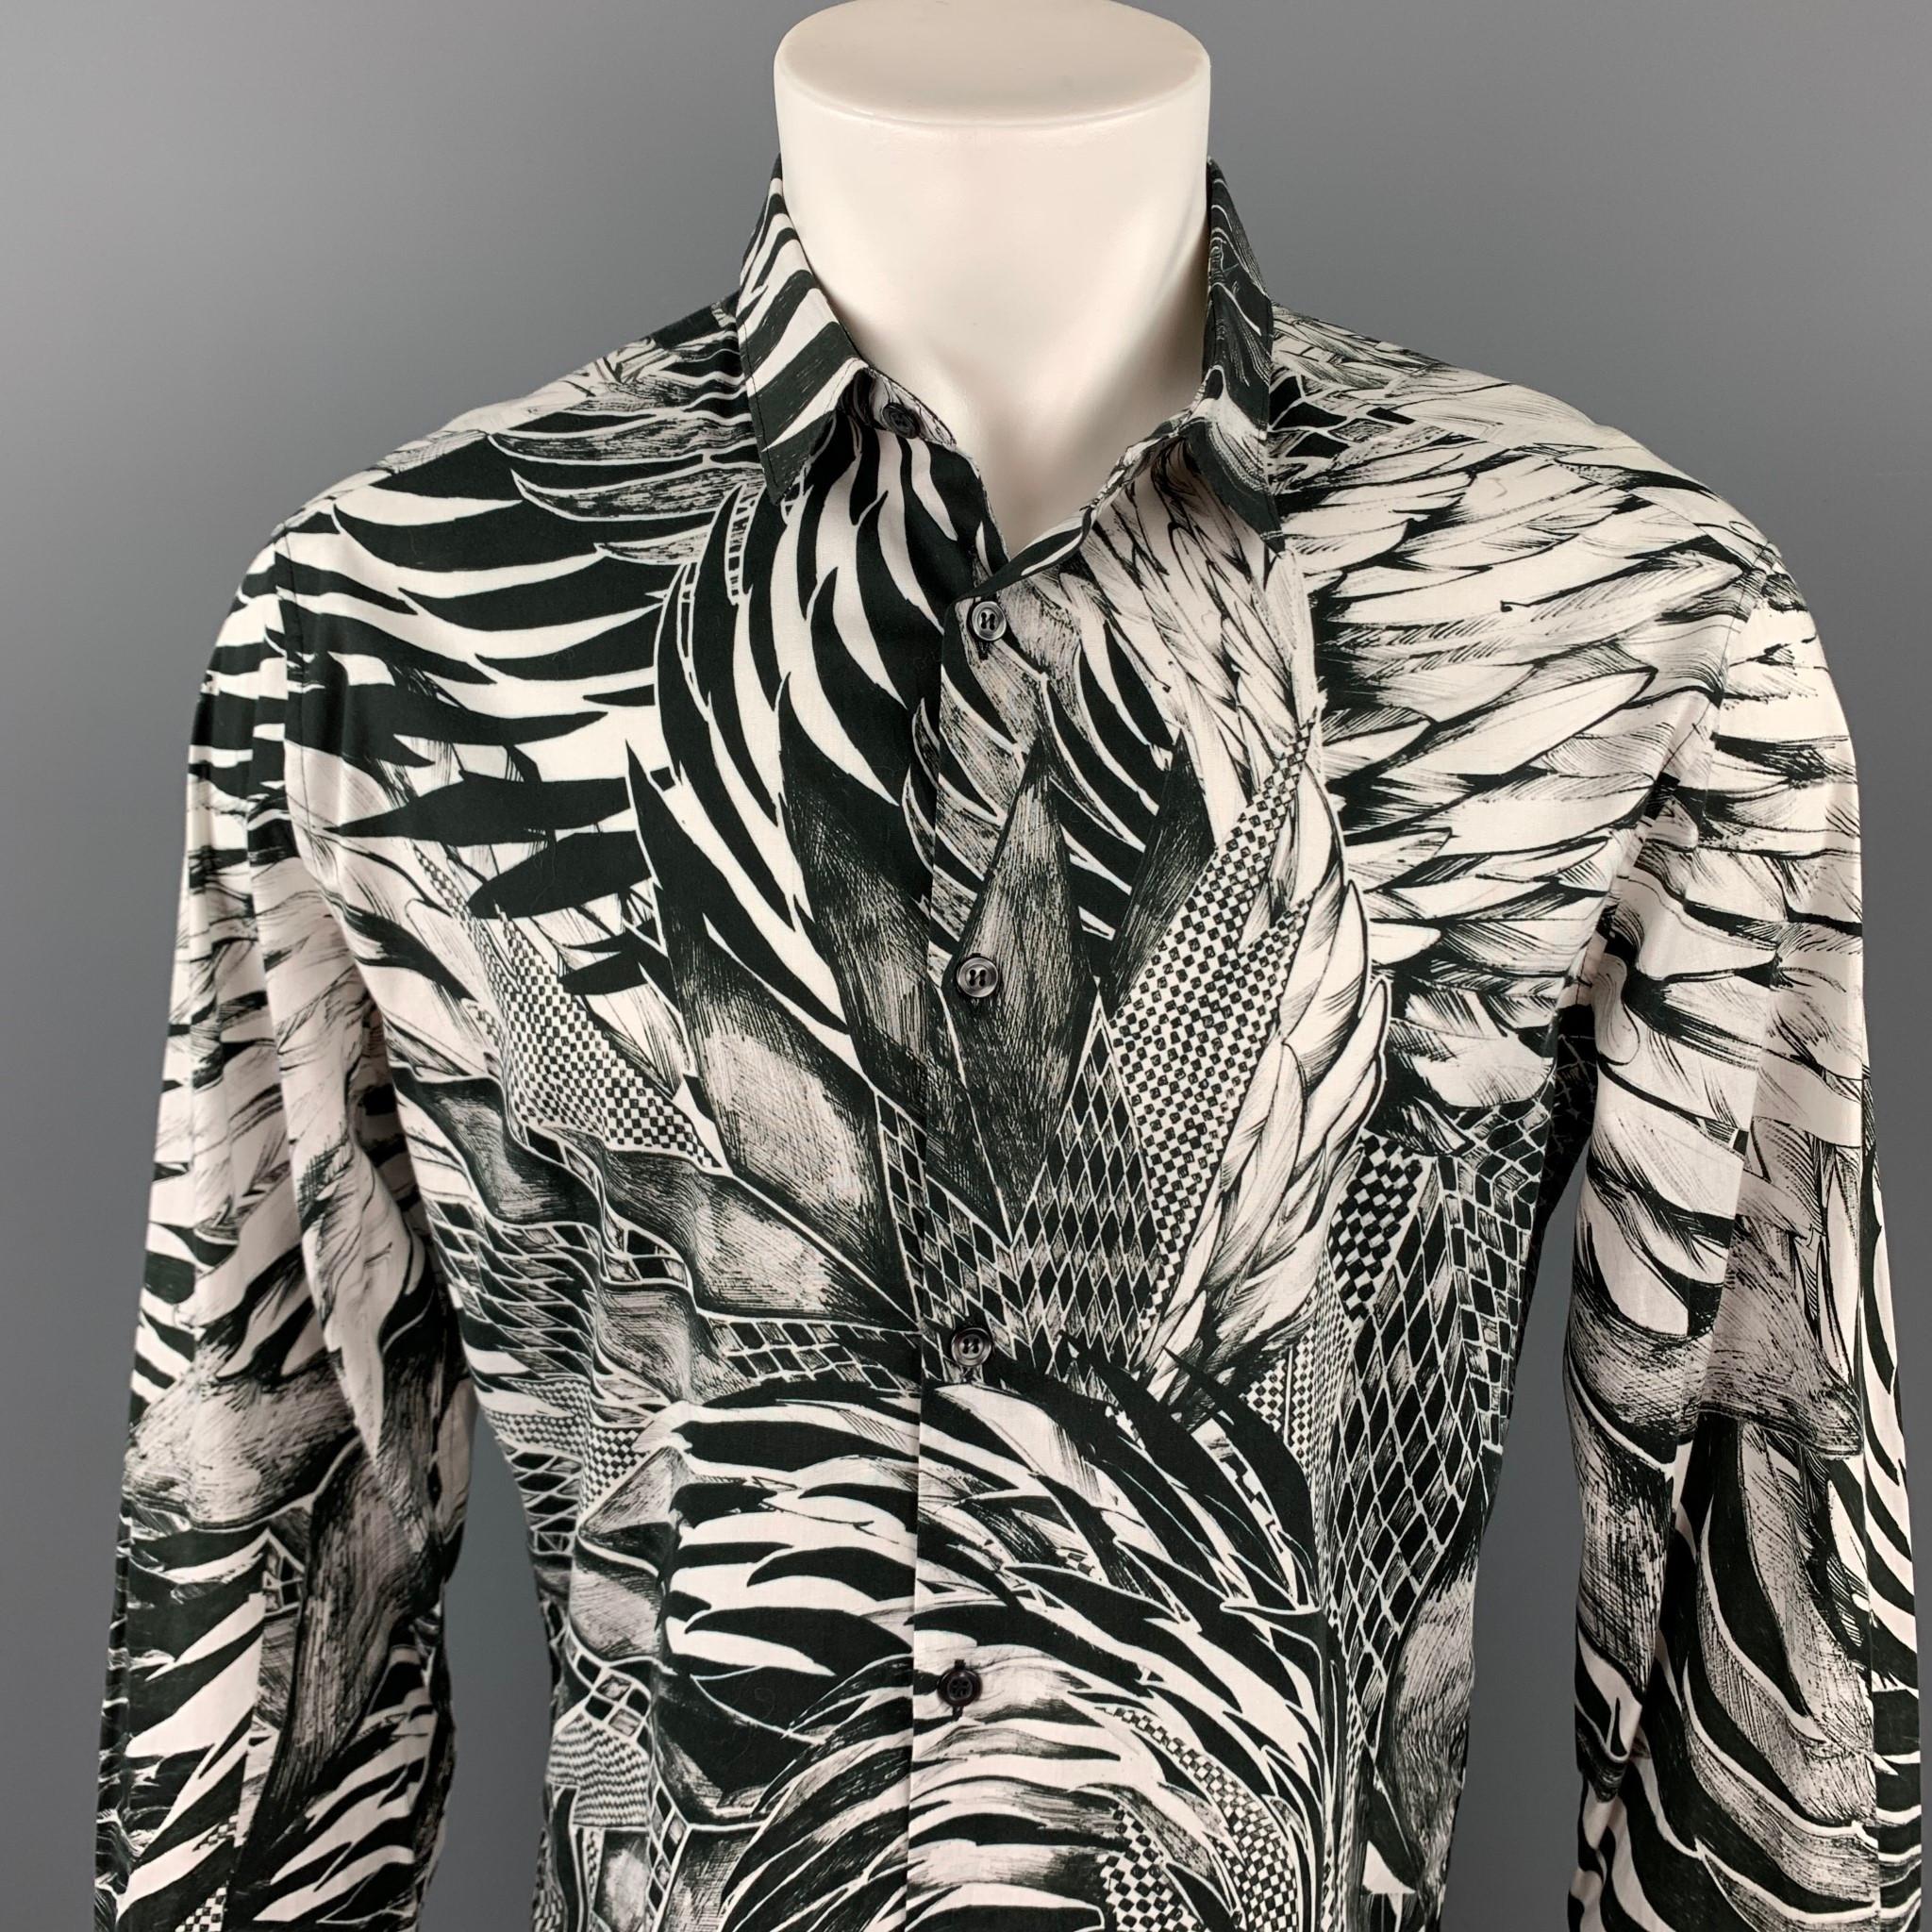 JUST CAVALLI long sleeve shirt comes in a black & white abstract print cotton featuring a button up style and a spread collar. Made in Romania.

Very Good Pre-Owned Condition.
Marked: 50

Measurements:

Shoulder: 19 in.
Chest: 44 in.
Sleeve: 27